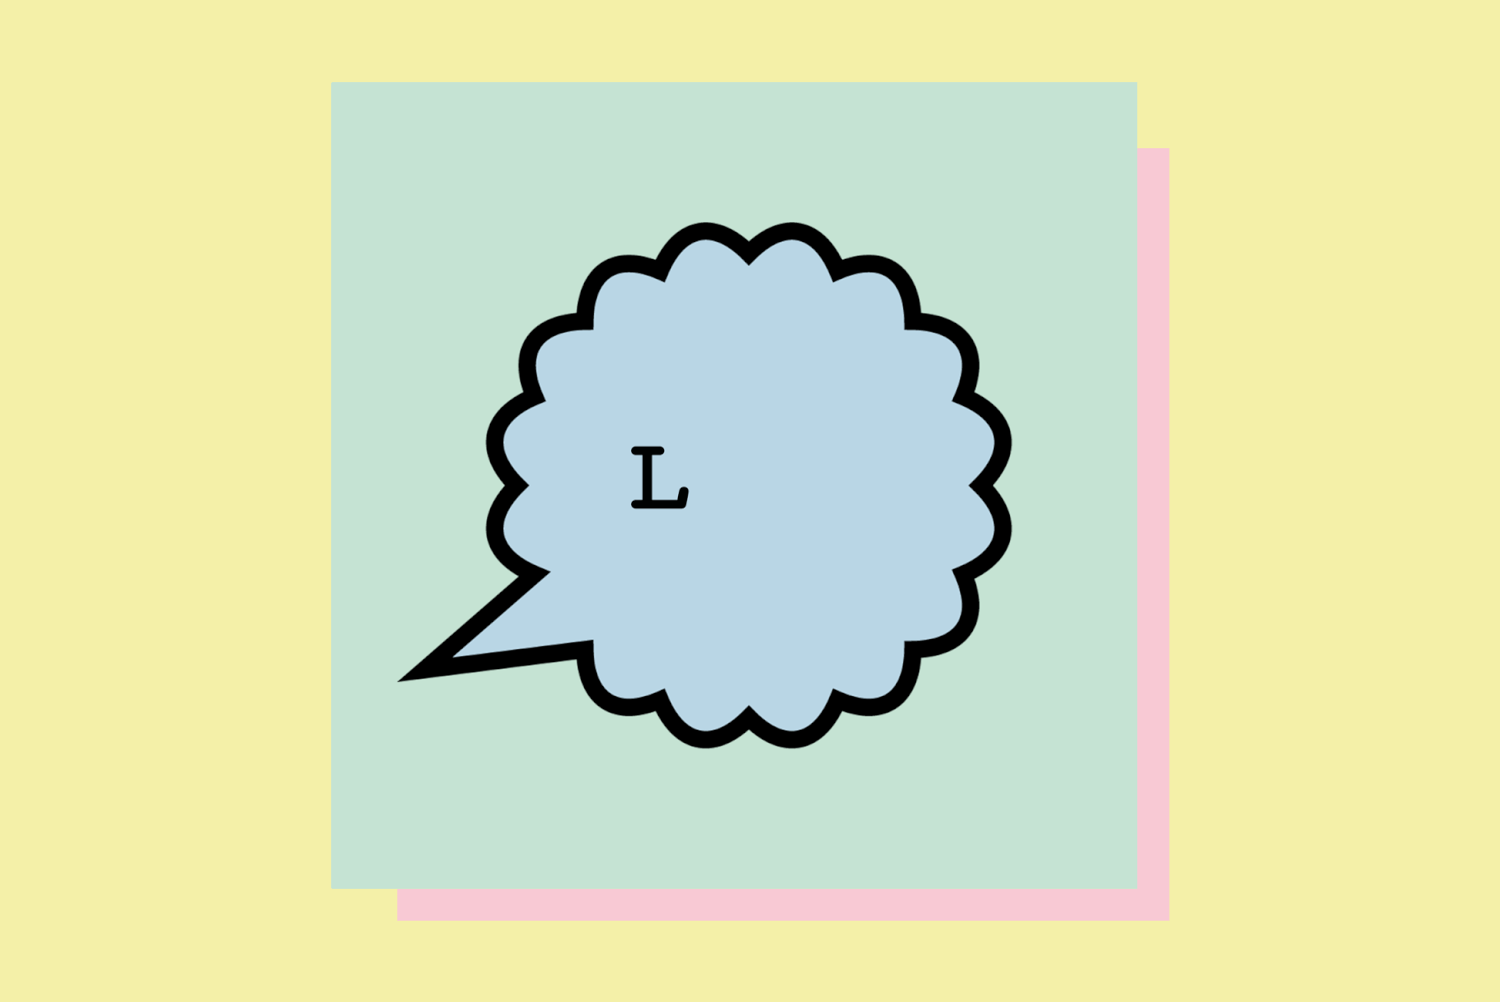 A gif of a speech bubble typing out the word "LIKE."